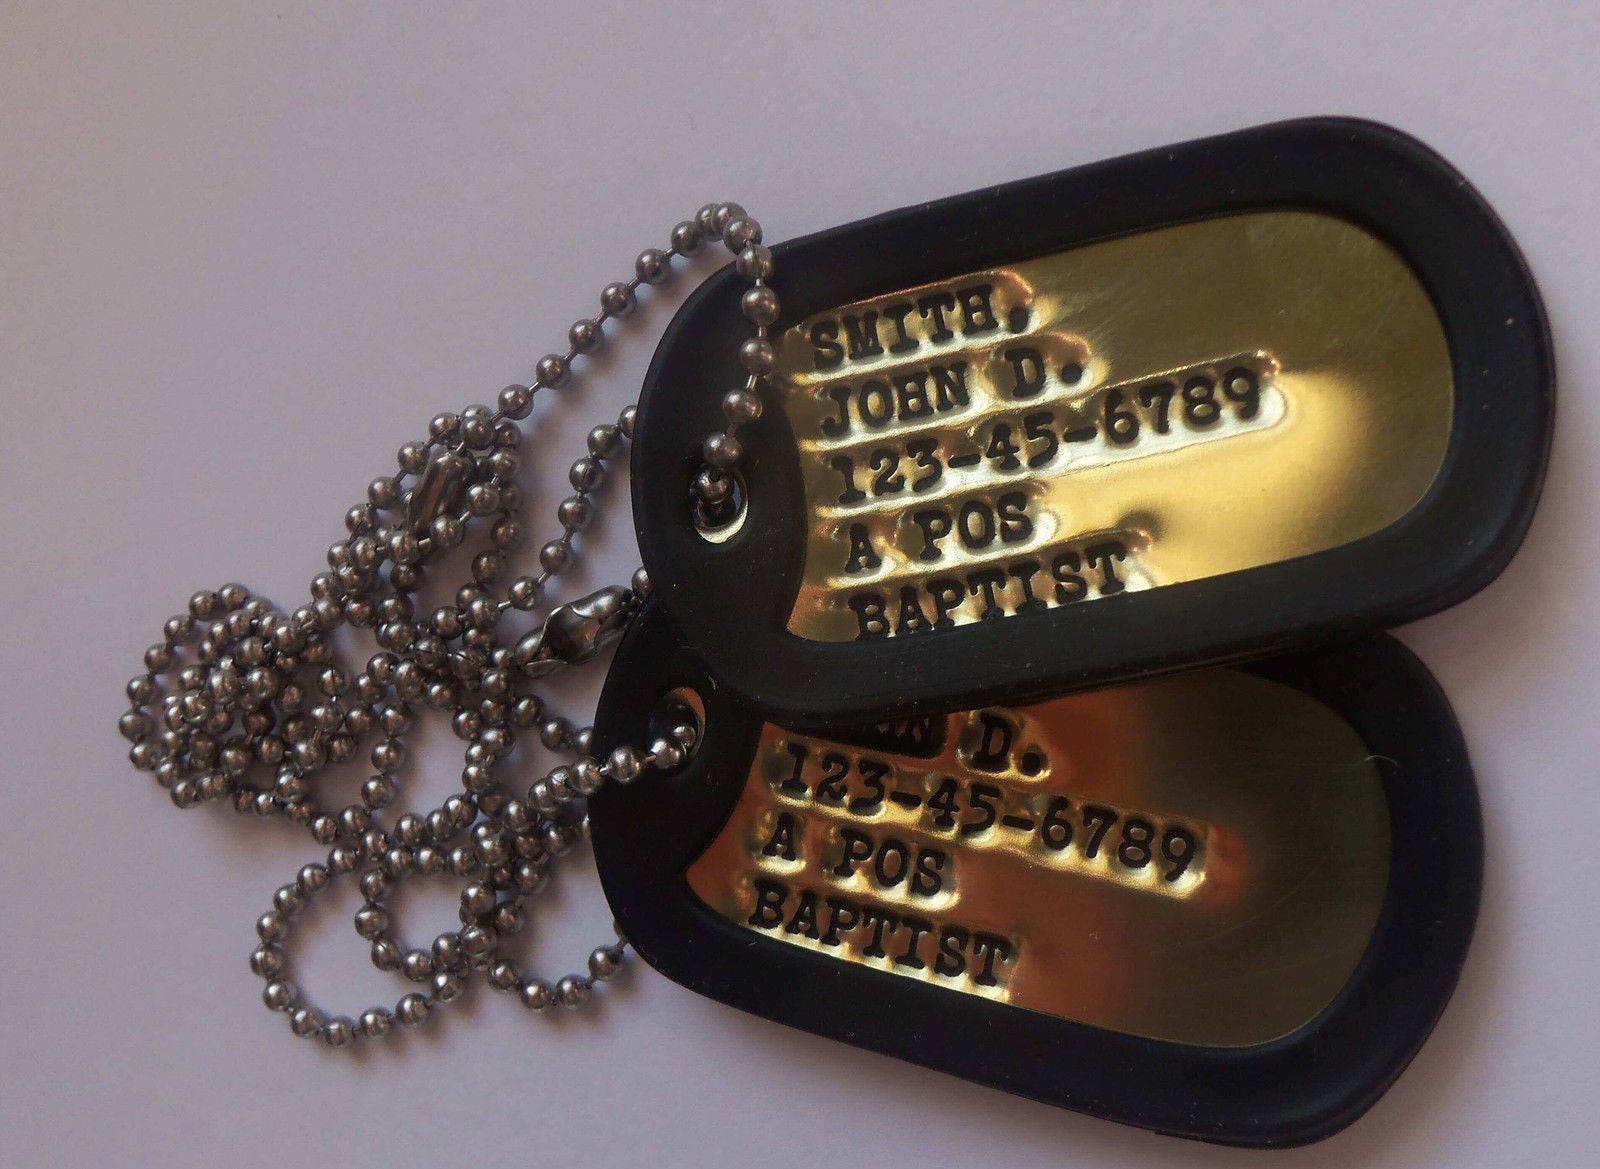 Real SINGLE Debossed Military Dog Tag Dogtag Personalized Customized For You